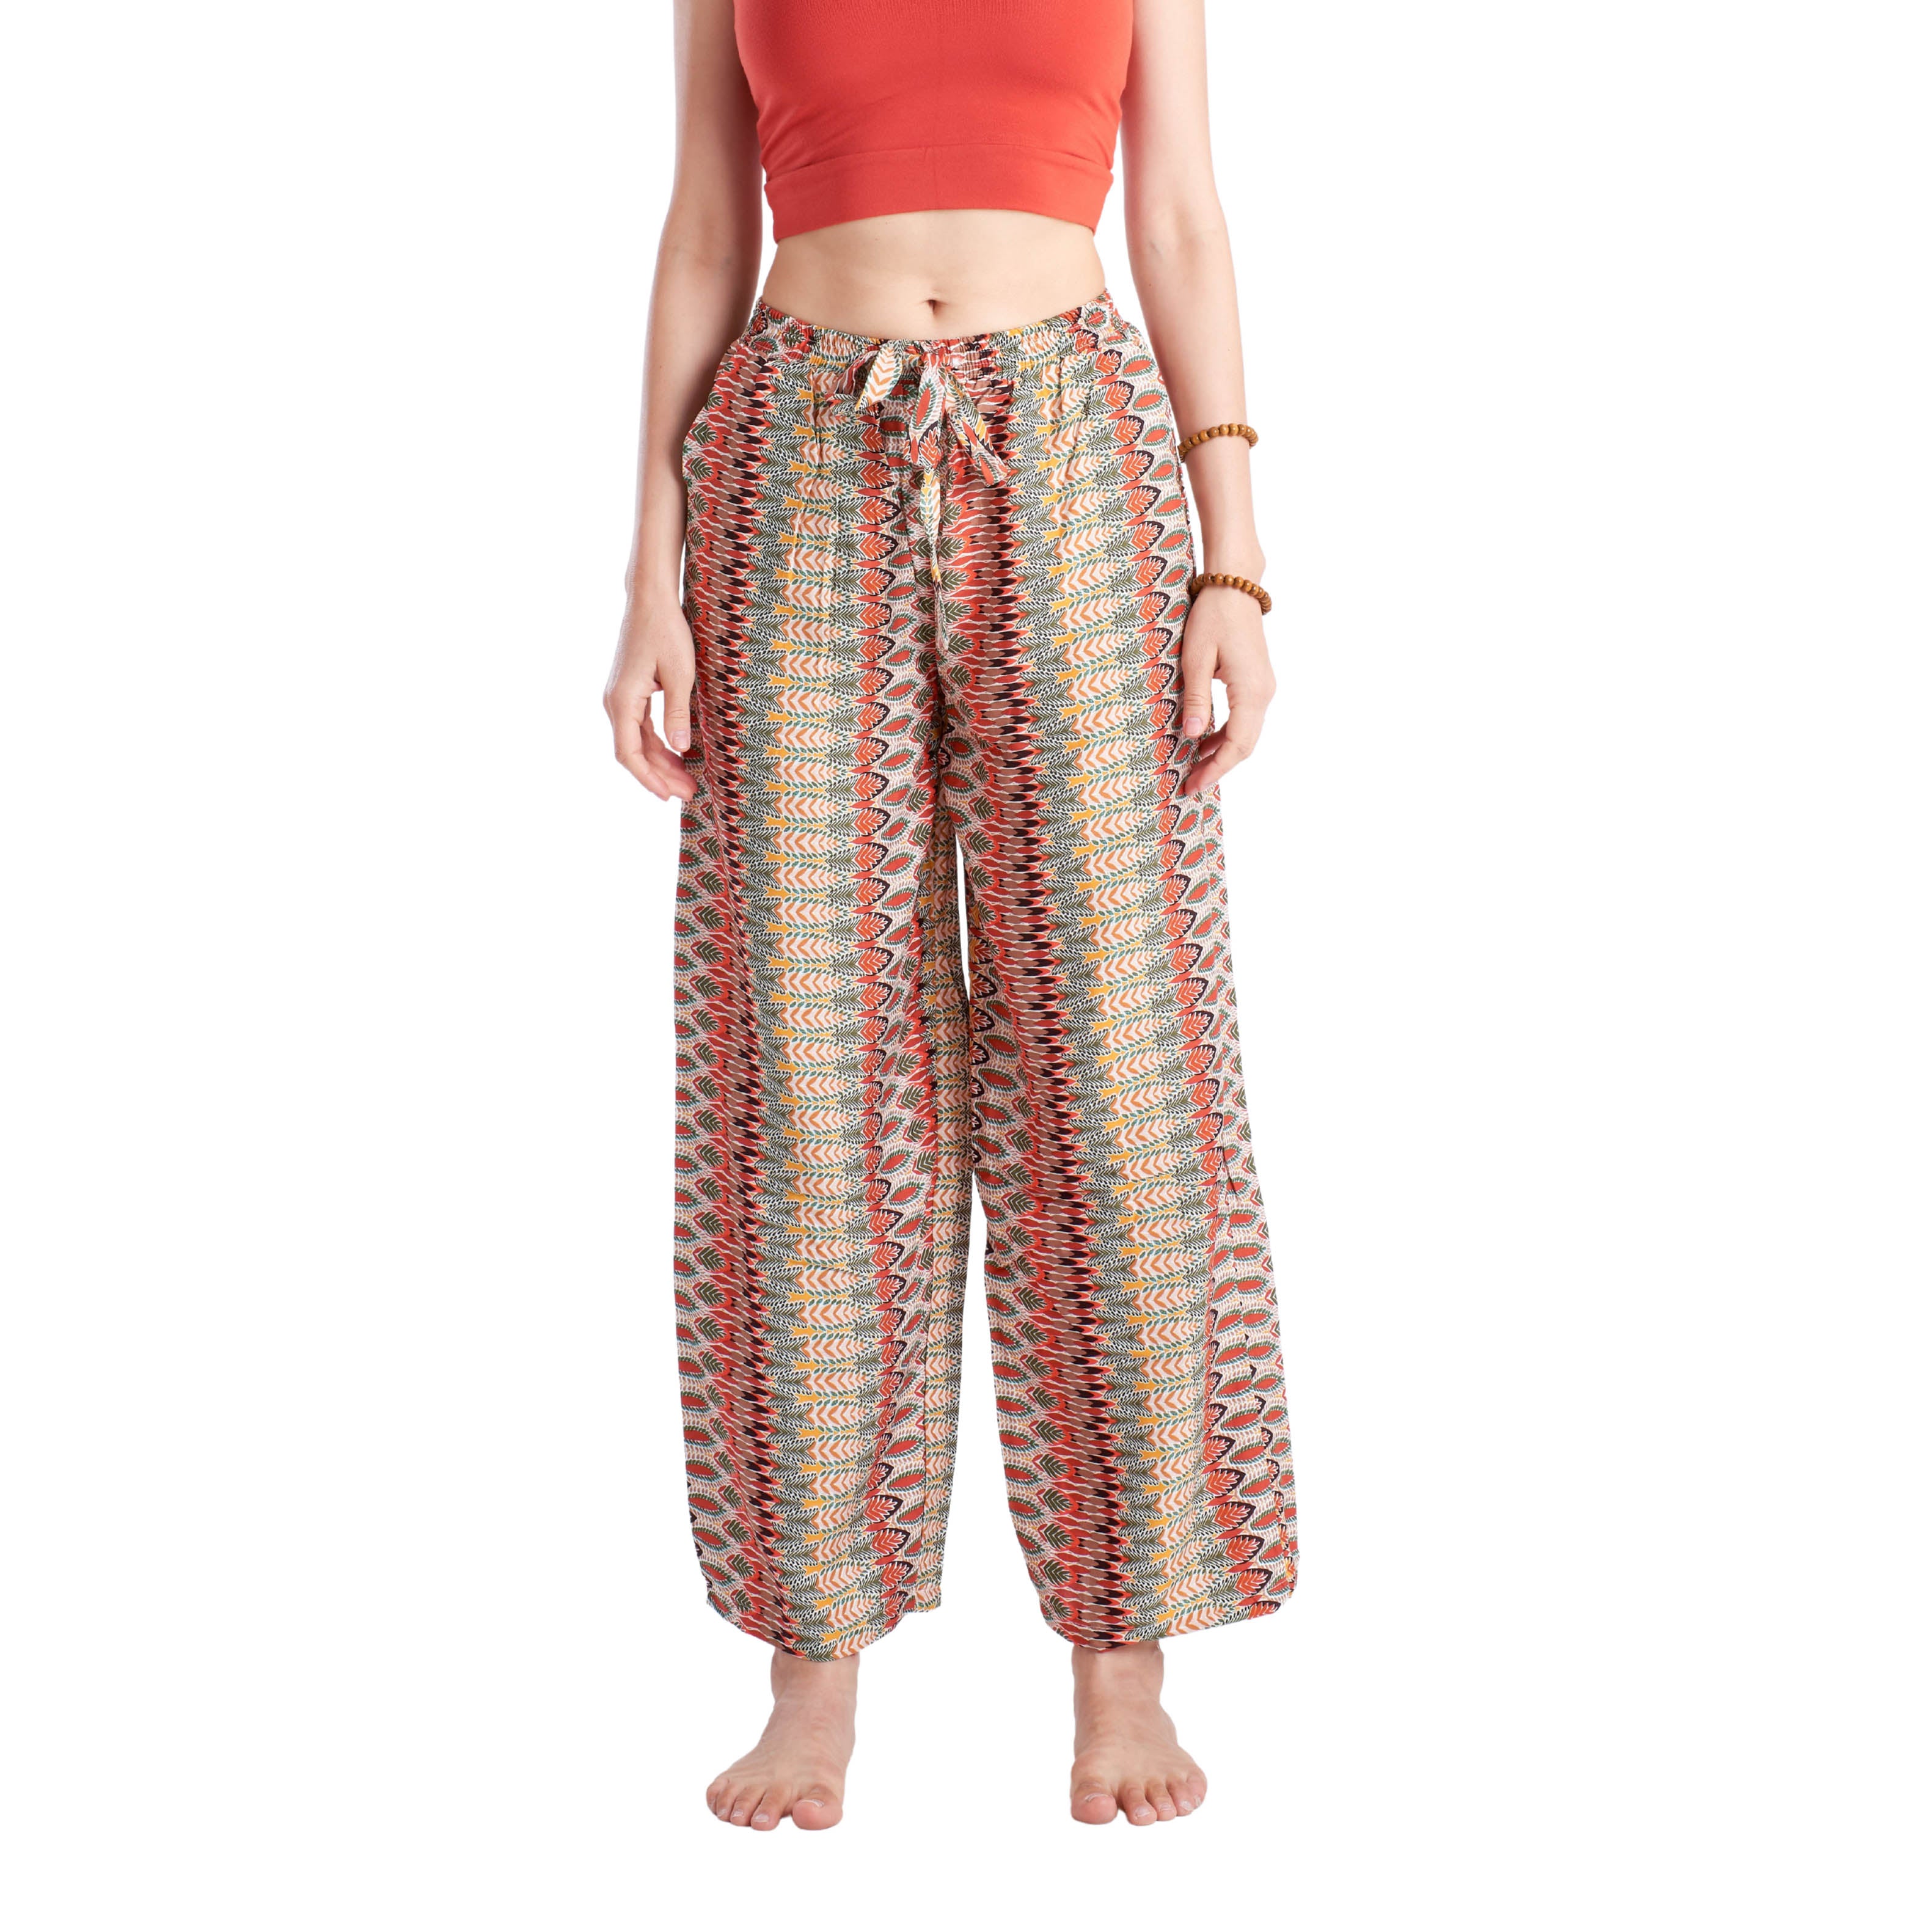 PERSIA PANTS Elepanta Casual Pants - Buy Today Elephant Pants Jewelry And Bohemian Clothes Handmade In Thailand Help To Save The Elephants FairTrade And Vegan